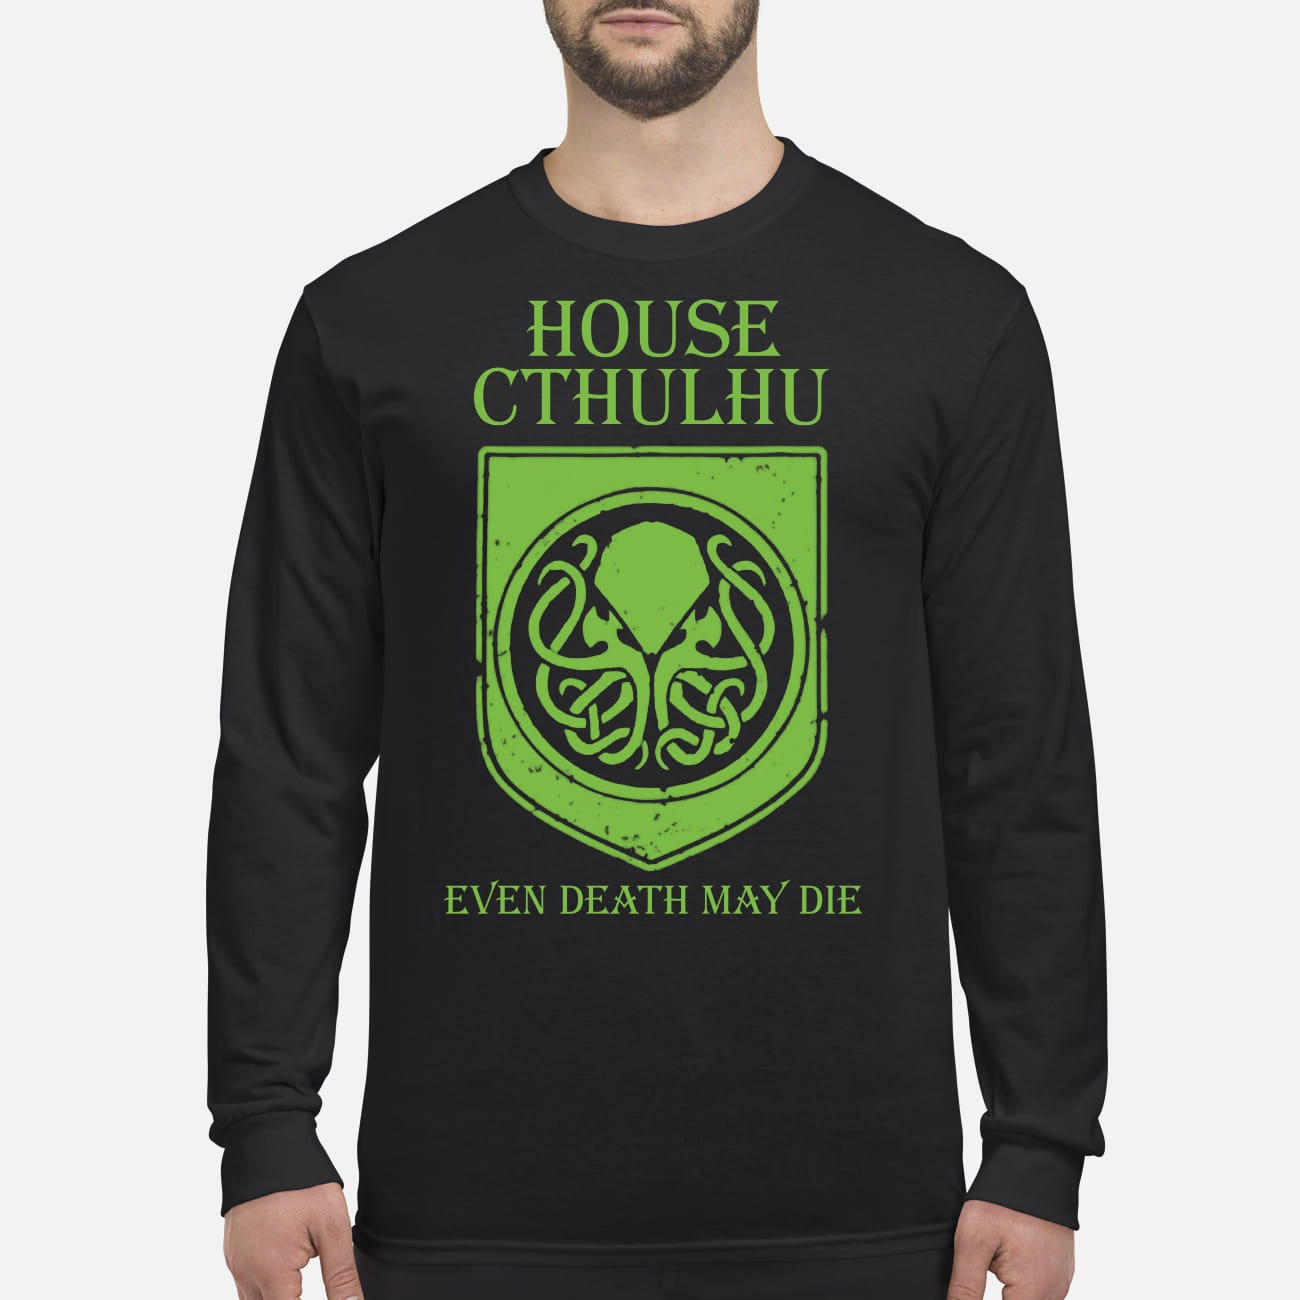 House cthulhu even death may die men's long sleeved shirt